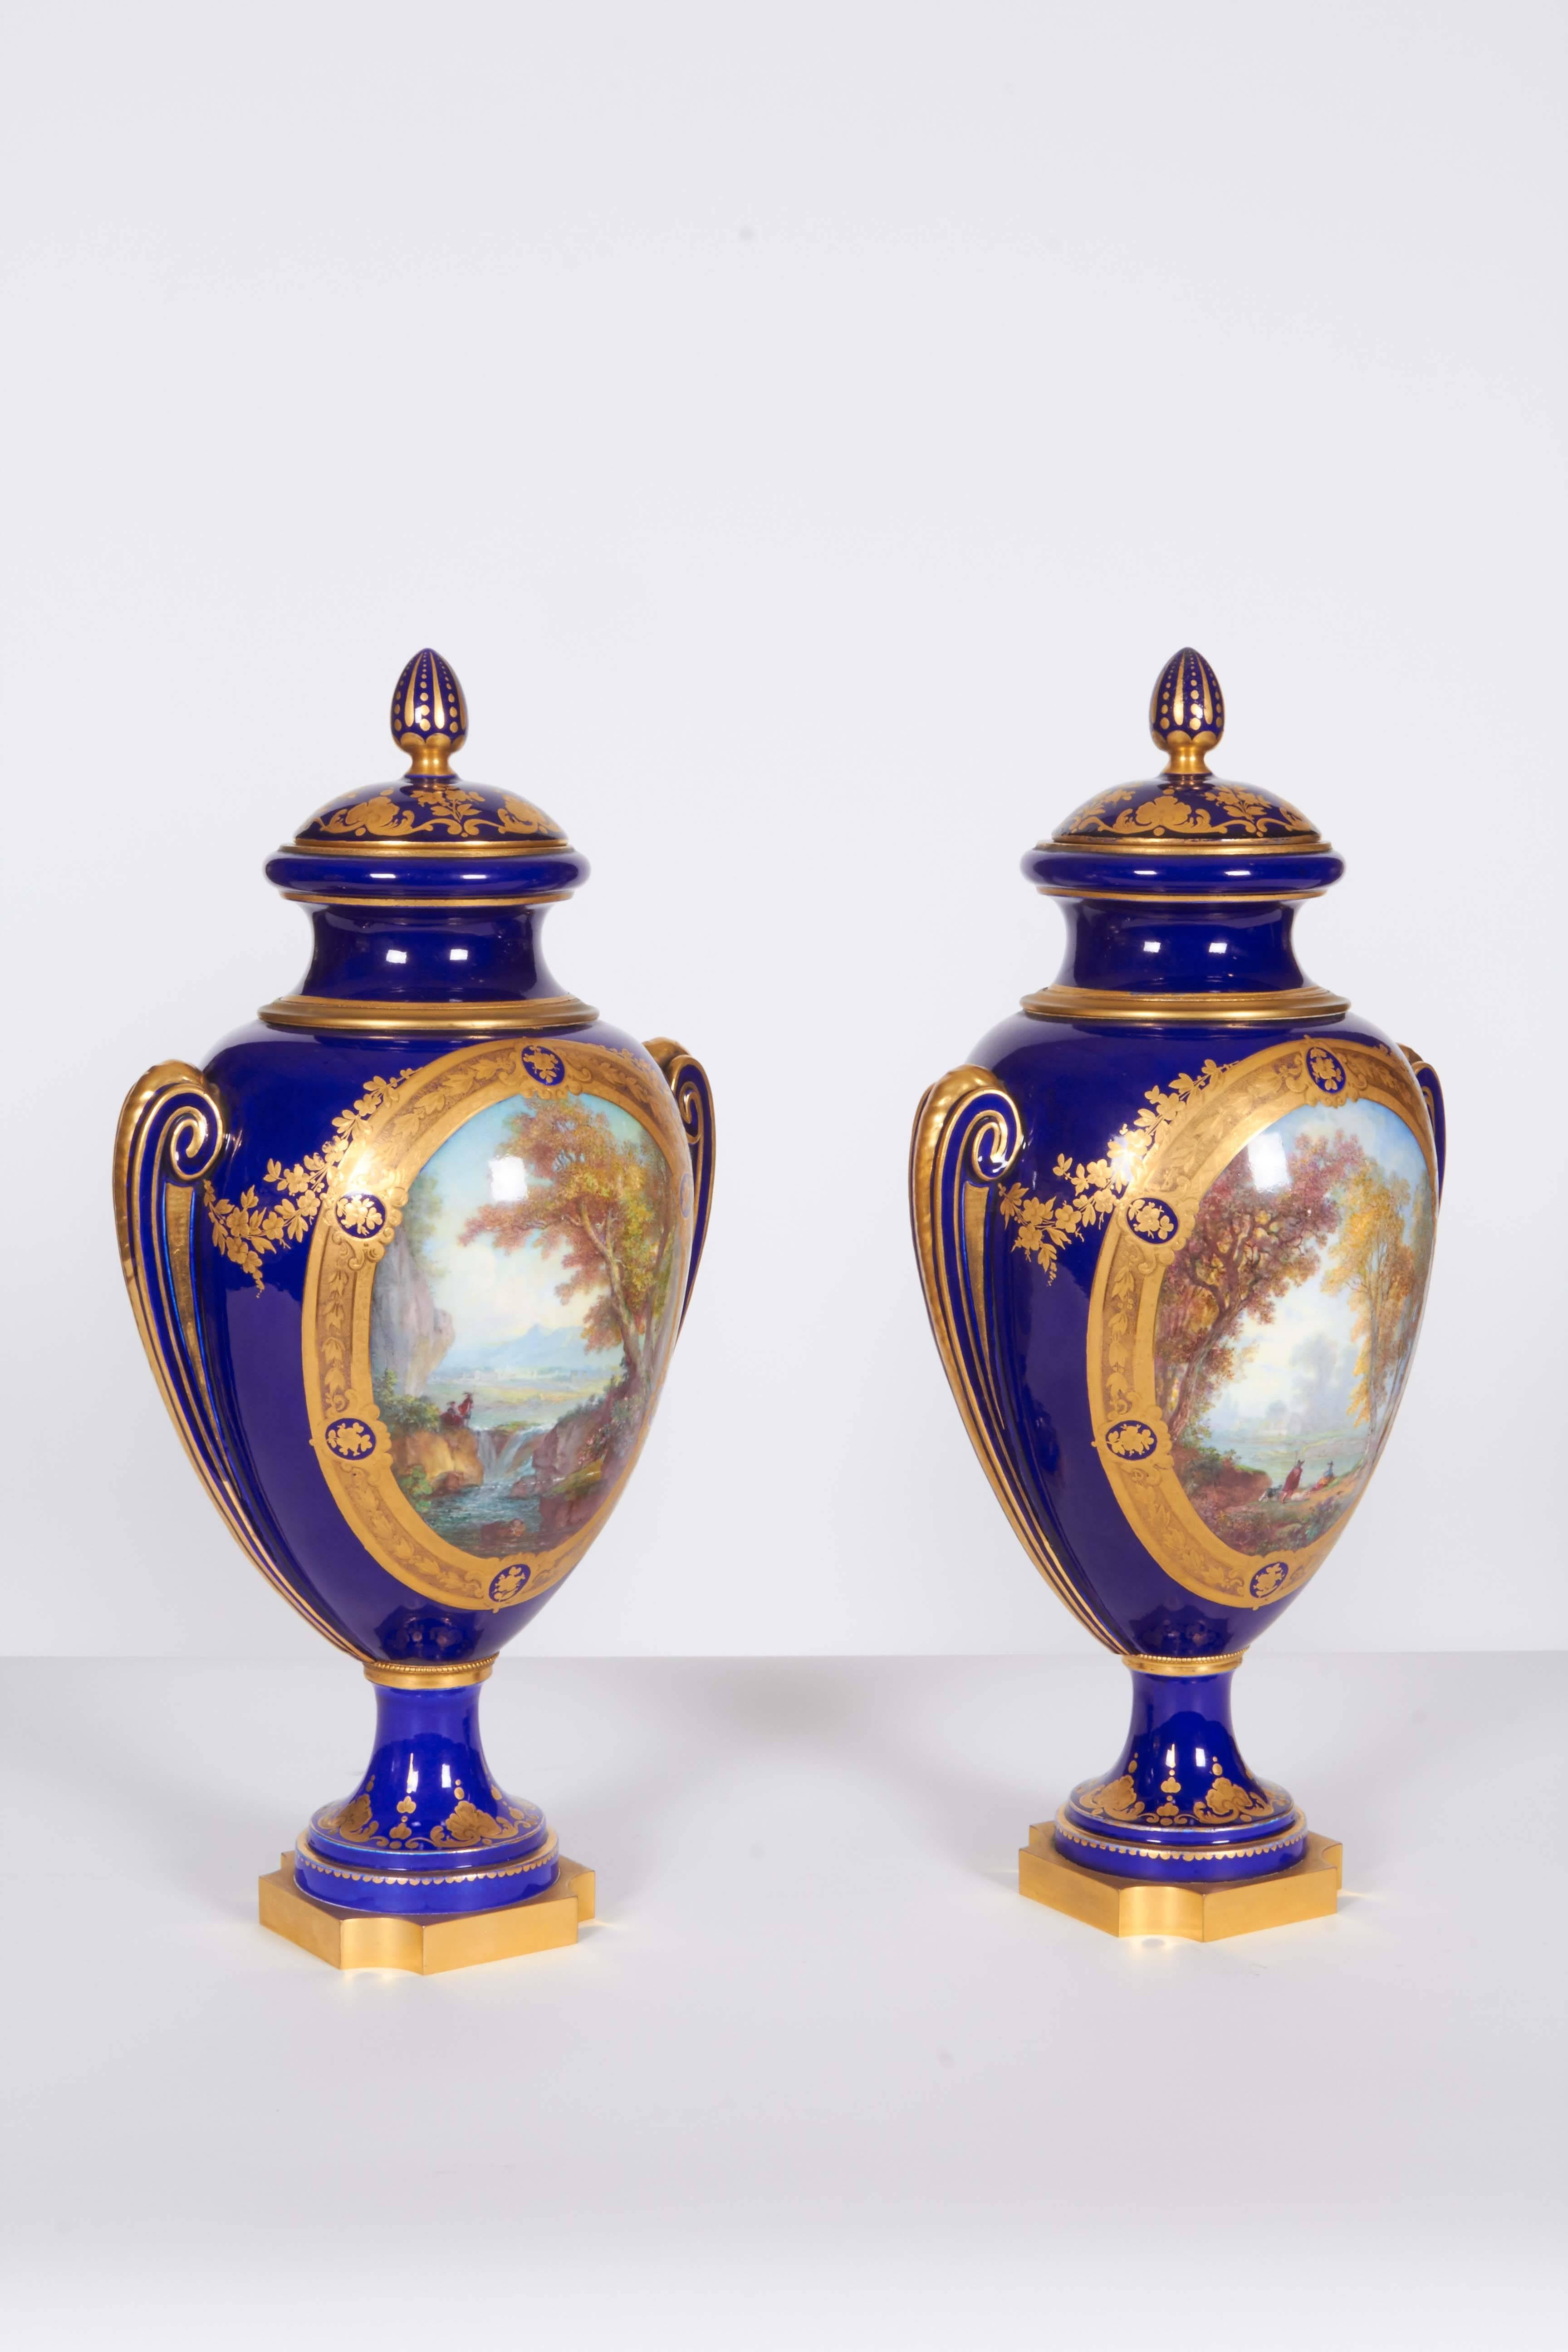 Pair of Napoleon III Sevres porcelain cobalt blue vases and covers on ormolu bases.

Vases 'DE PARIS'.
Dated 1863-1867, Crowned N DECORE A SEVRES 1867 MARKS, Incised A63, The ormolu bases are each stamped twice.

Very finely painted.

For a